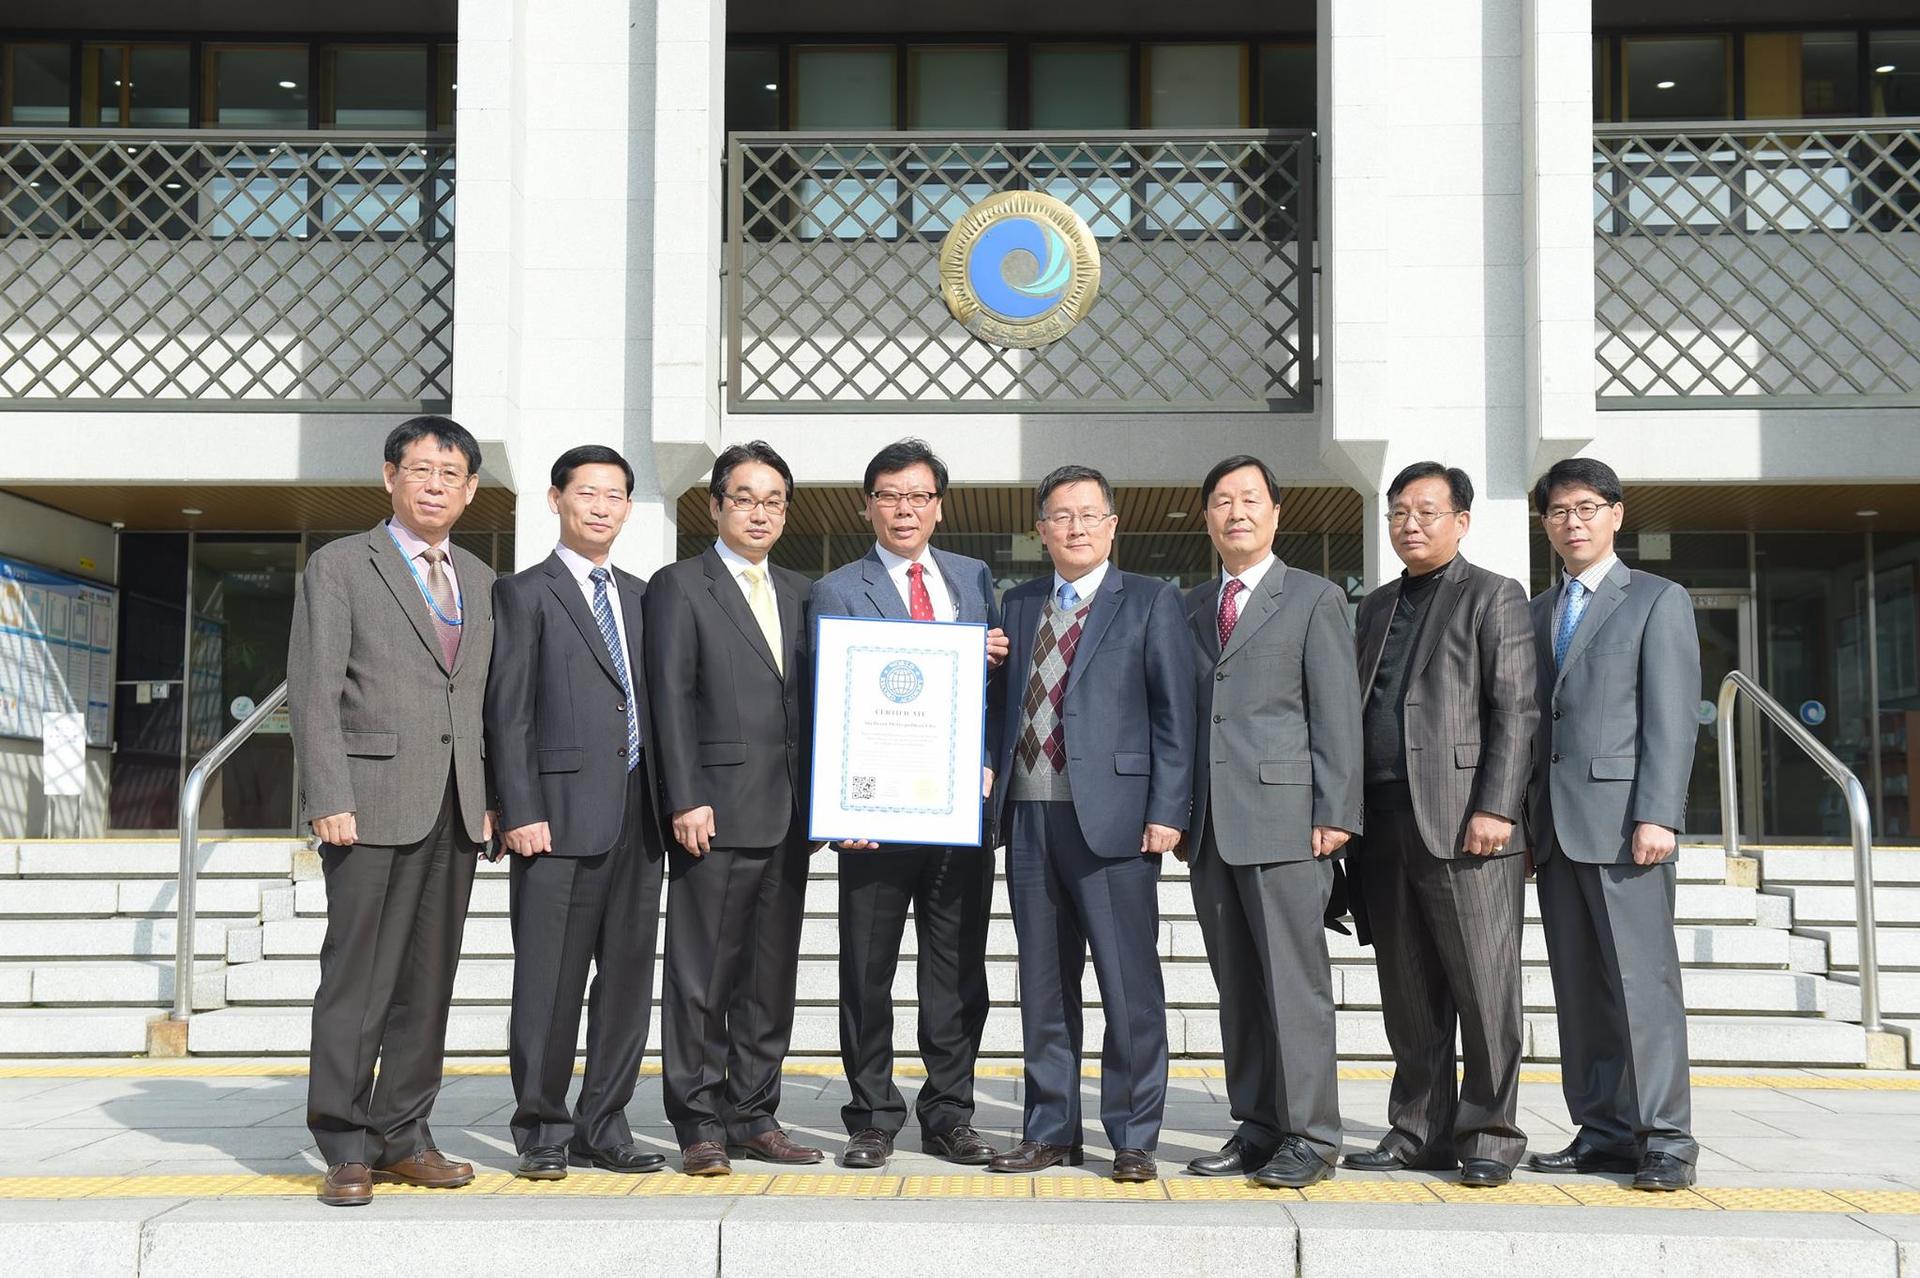 Longest Operation of Thermal Power Plant Without Breakdowns: Boryeong Plant sets world record